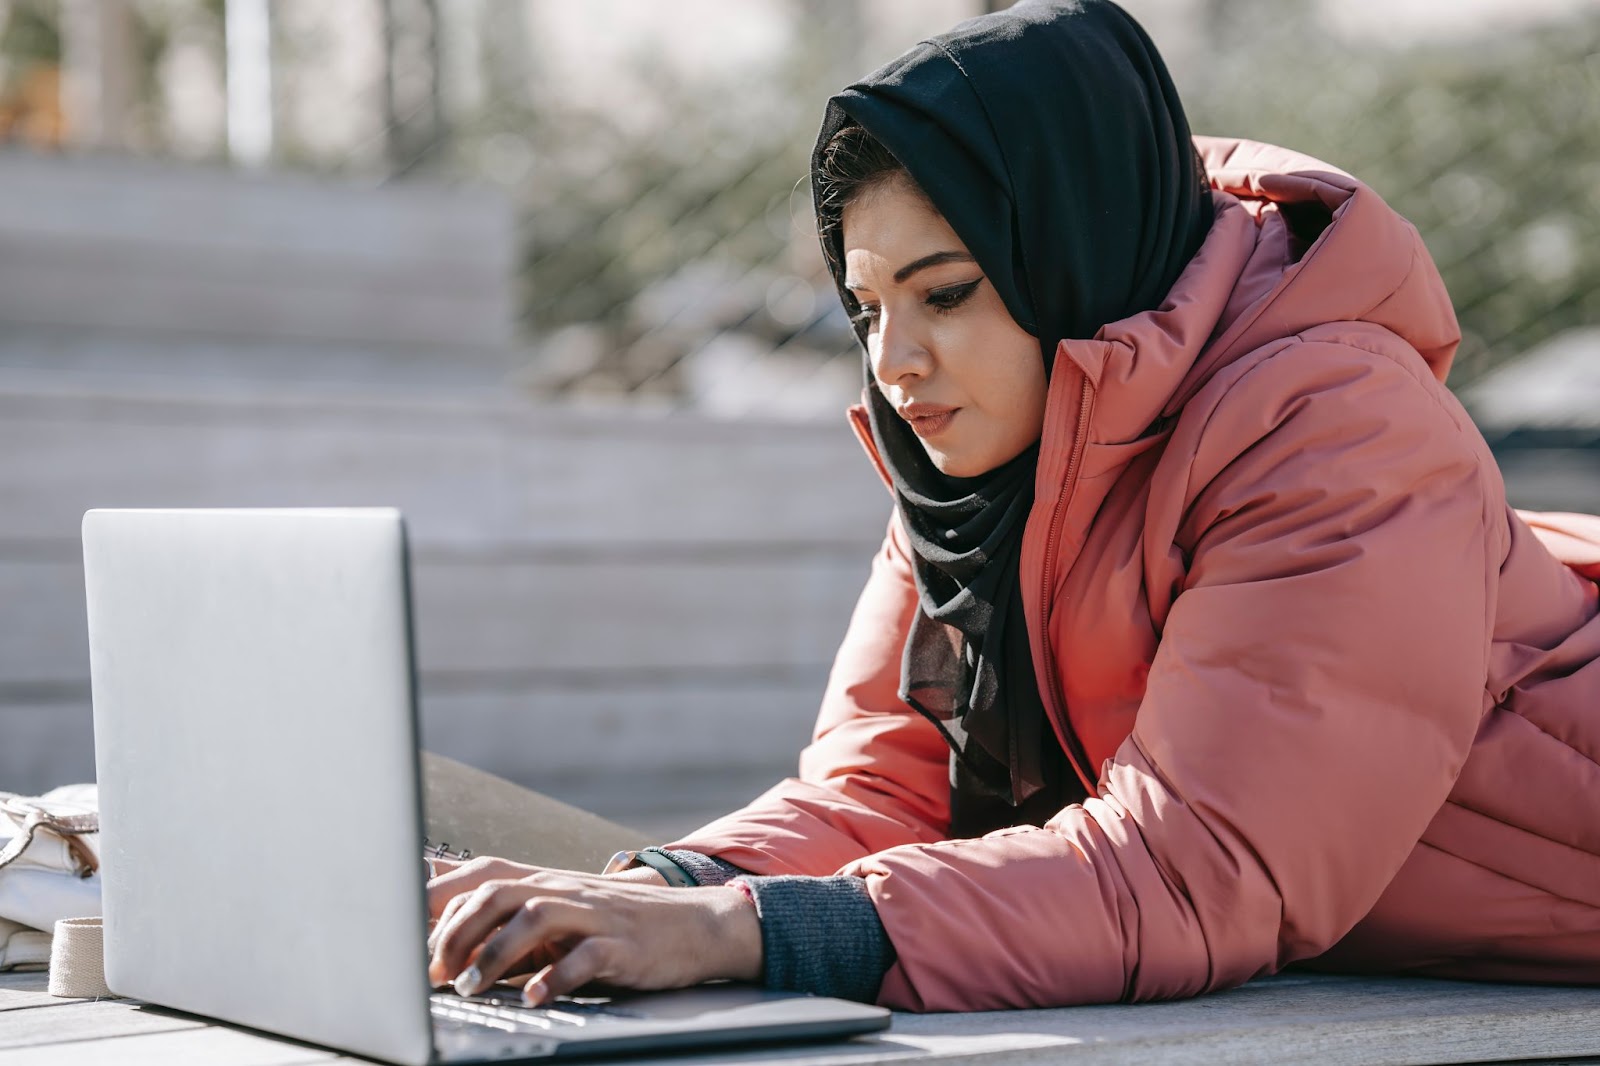 A focus shot of a young woman, wearing a hijab and a winter jacket, lying on a bench outside and working on her laptop